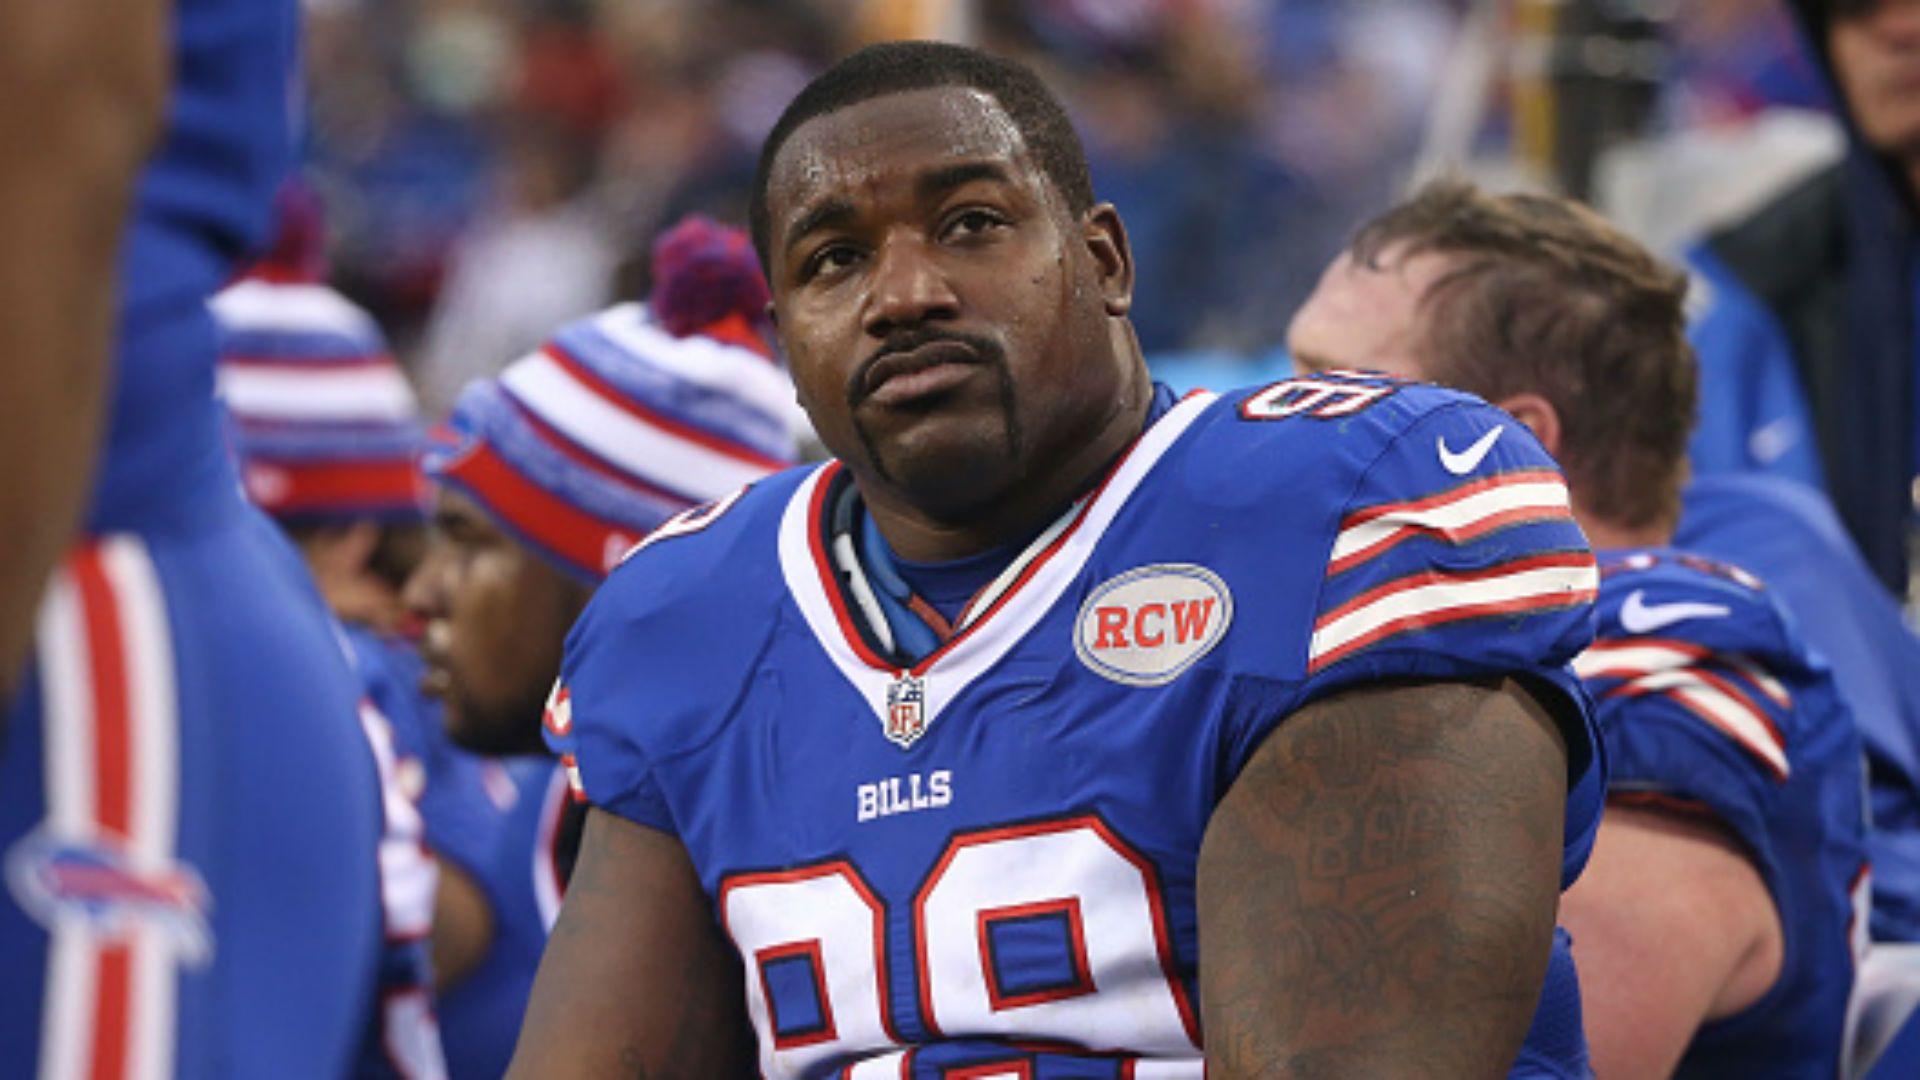 Marcell Dareus claims he was hacked, didn't write 'F— the Bills, I